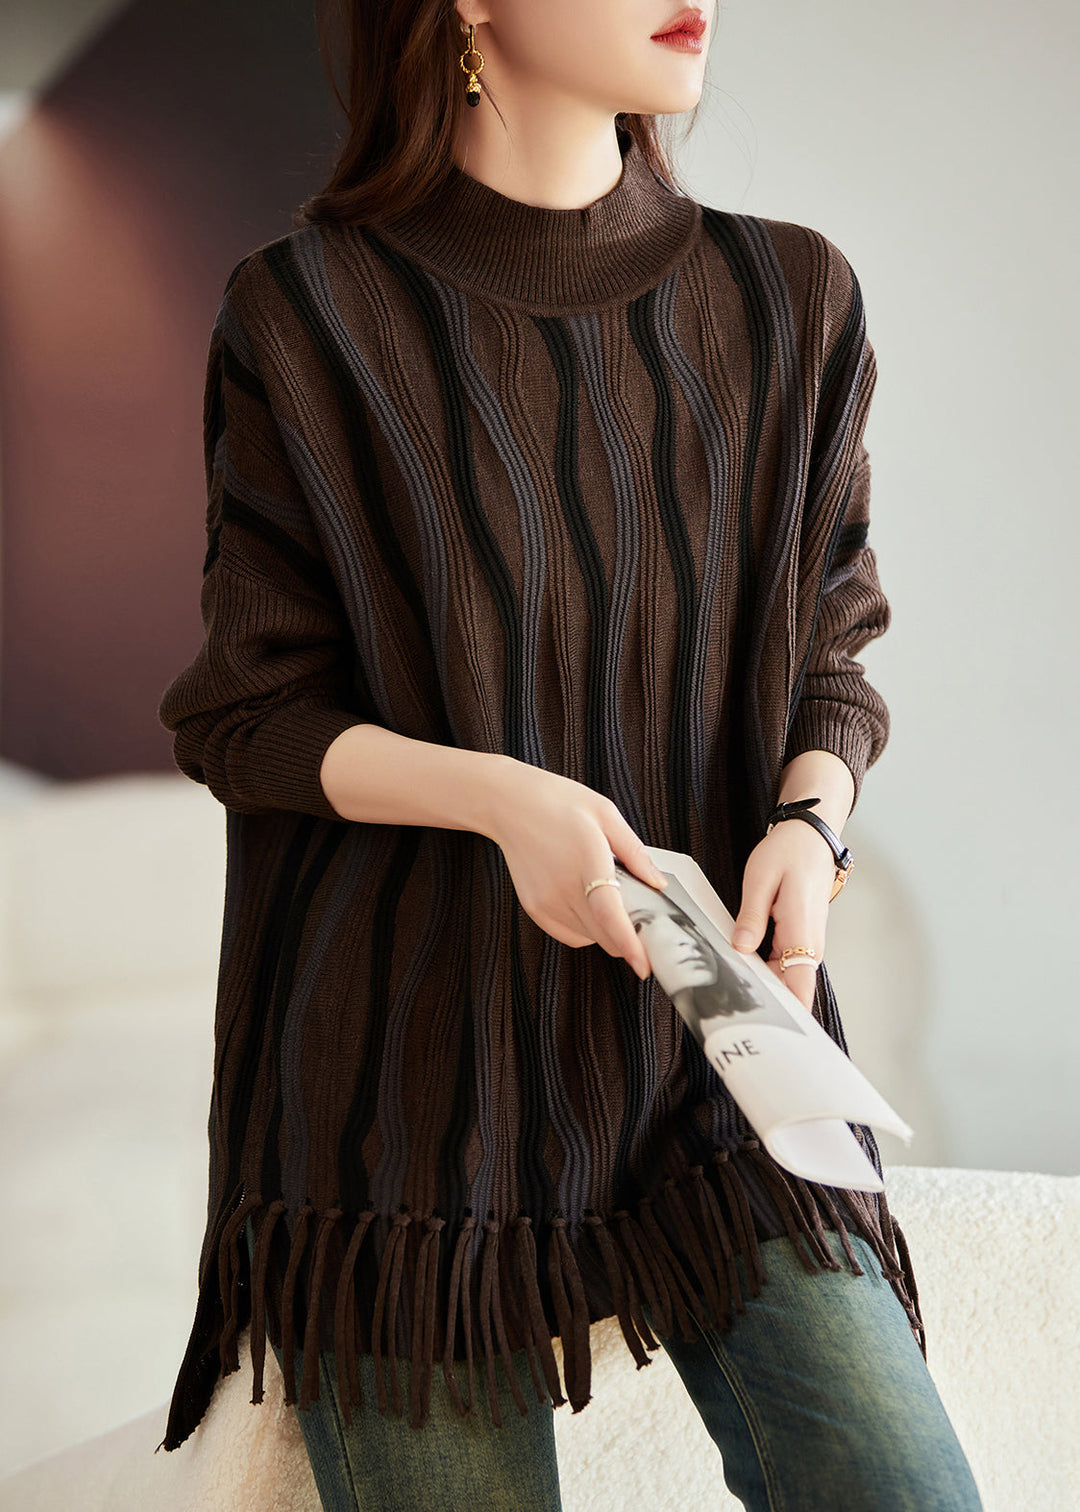 Loose Cozy Black Coffee Tasseled Thick Knit Sweaters Winter